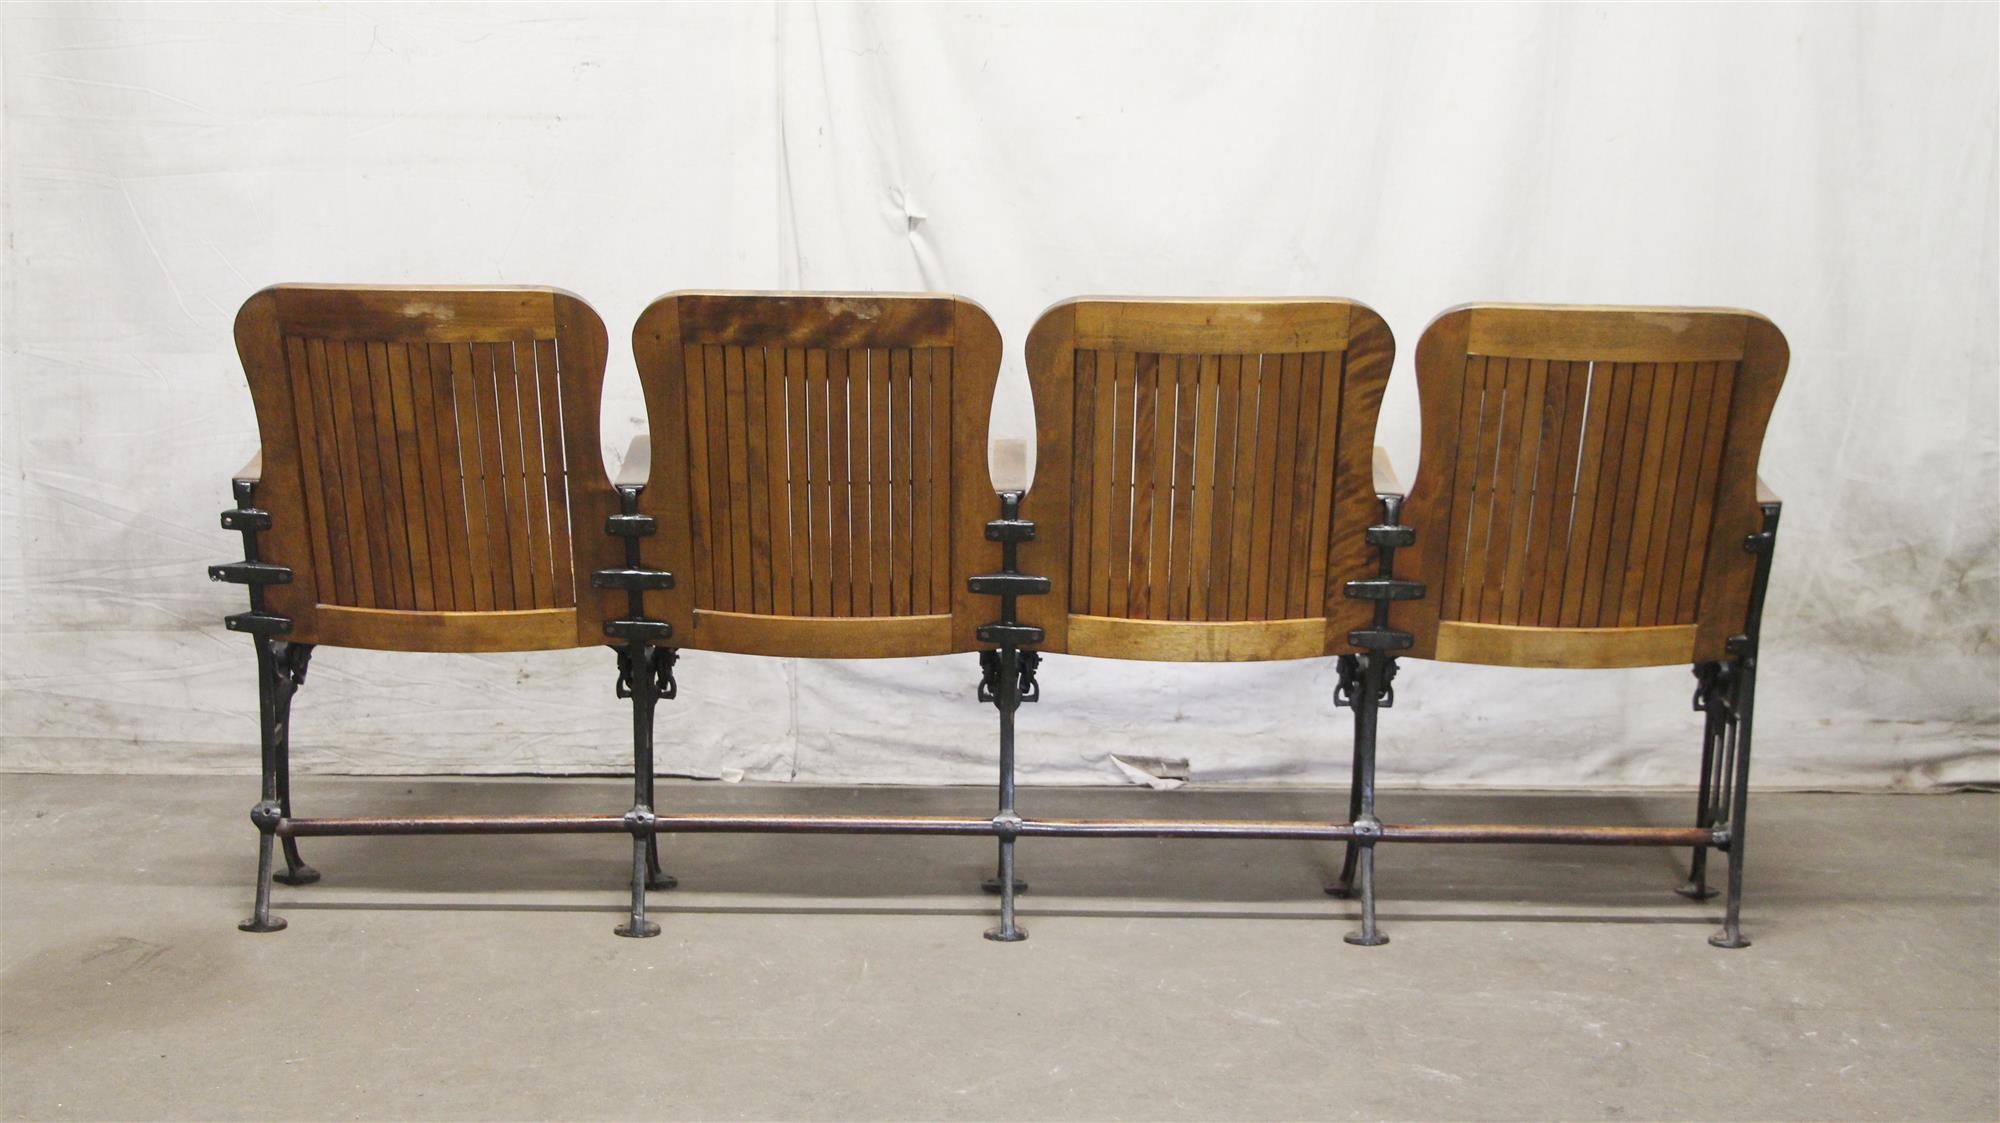 Eric, 1905 Four Seat Folding Theater Chairs with Cast Iron Frame from Brooklyn 3